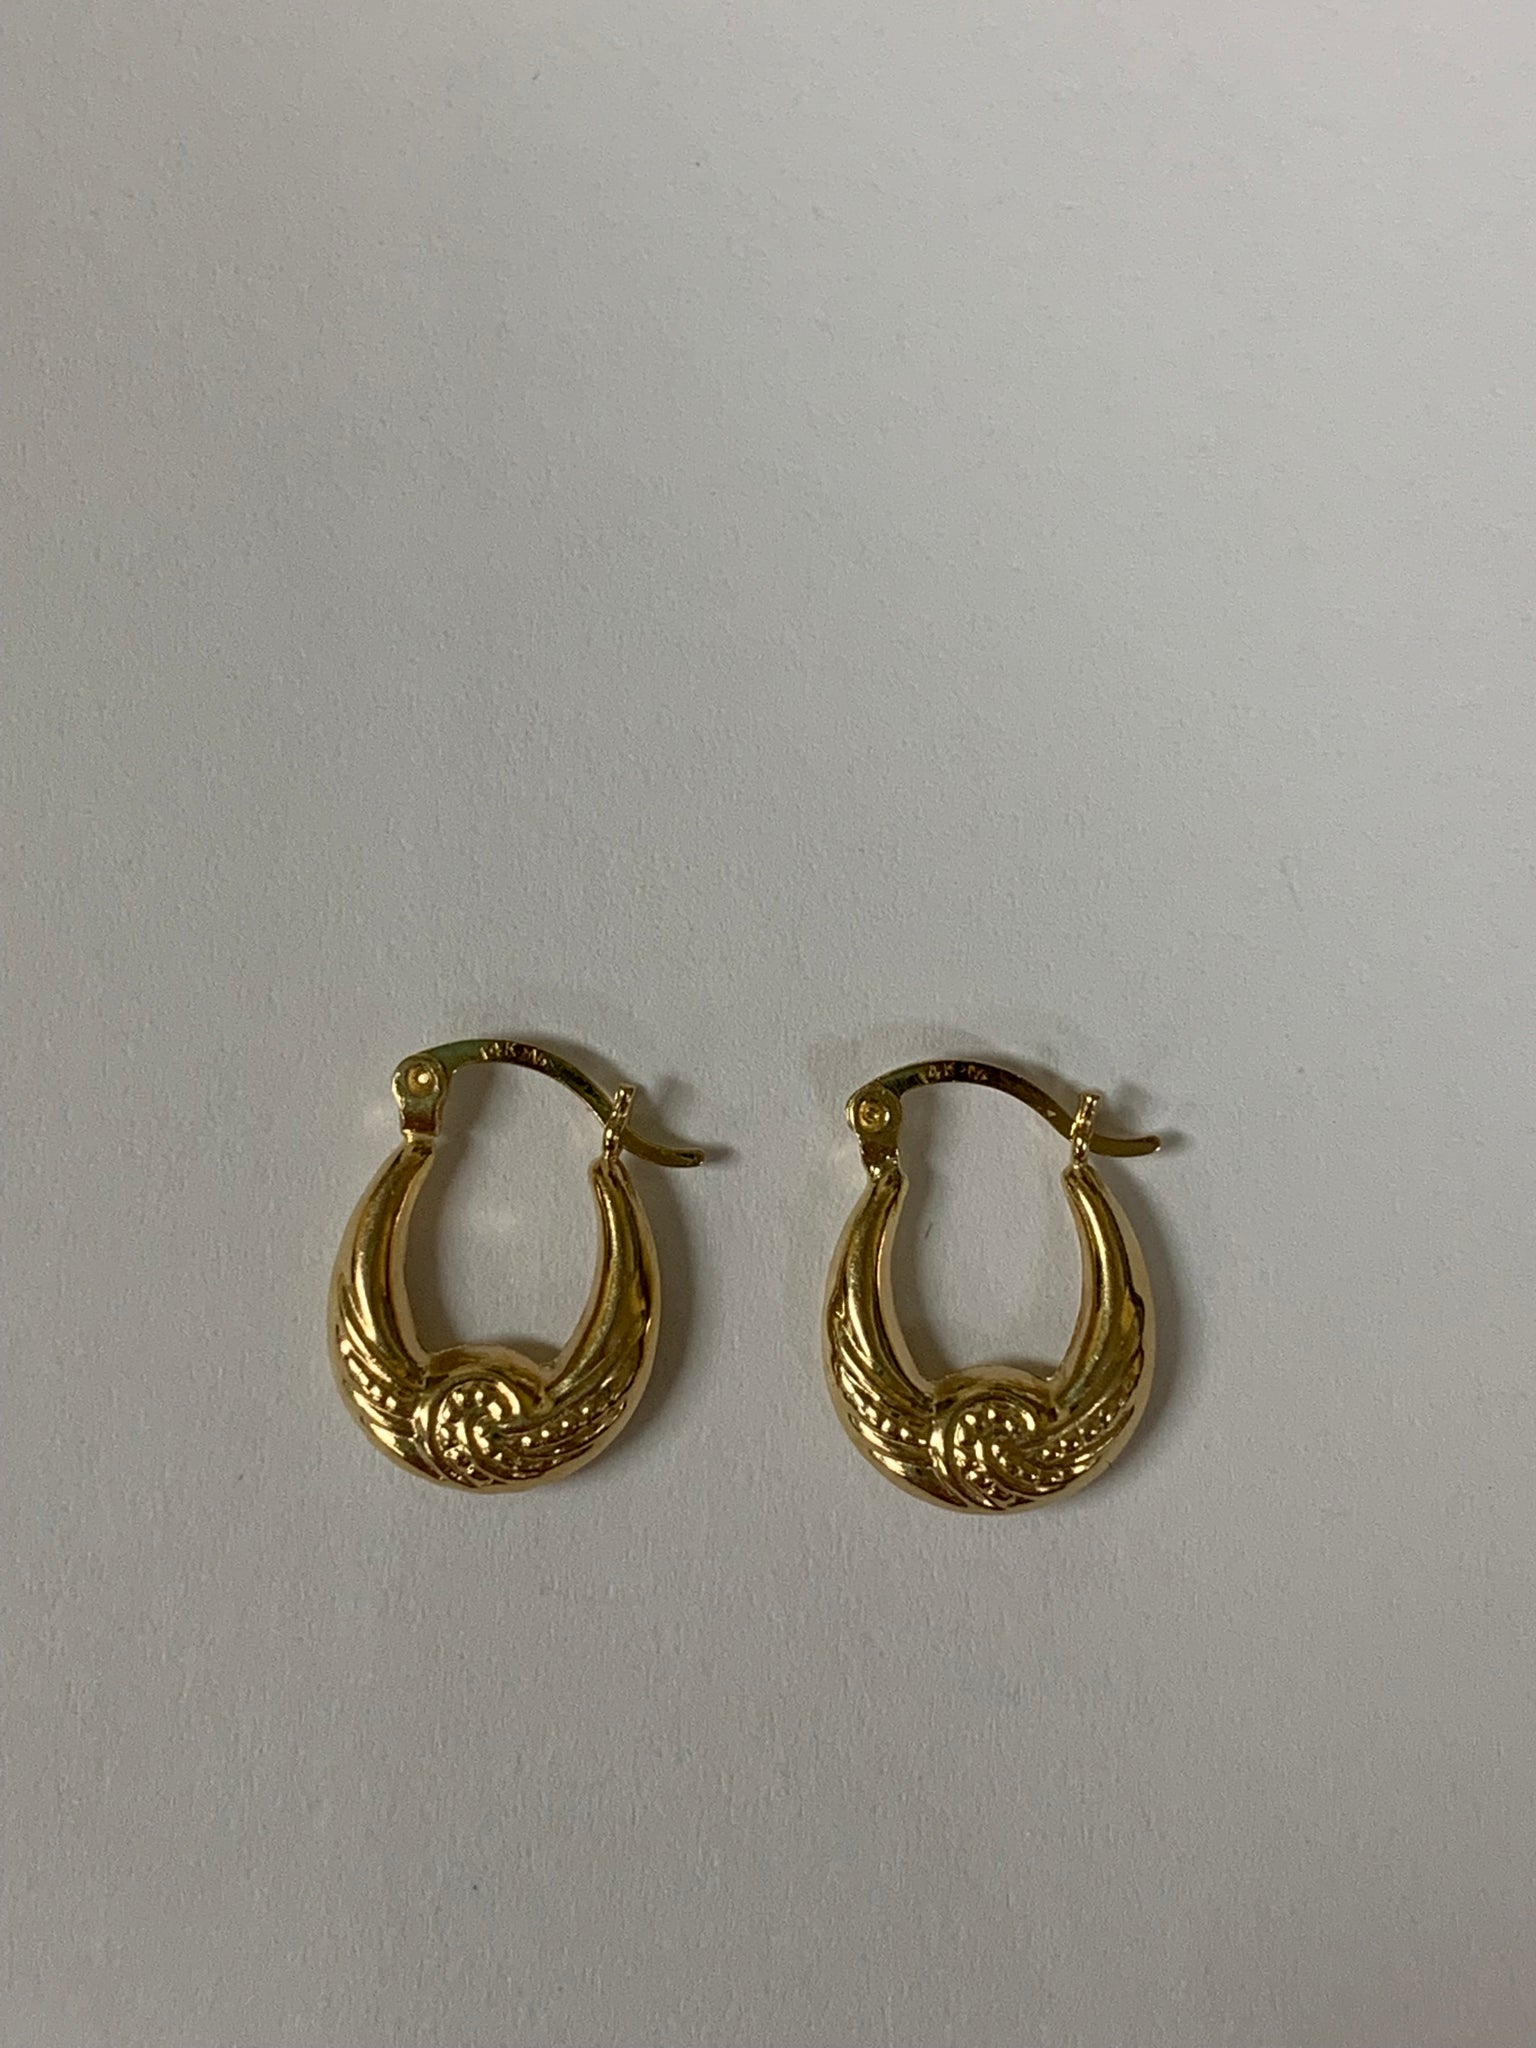 18ct Yellow And White Gold Fancy Hoop Earrings | Ramsdens Jewellery